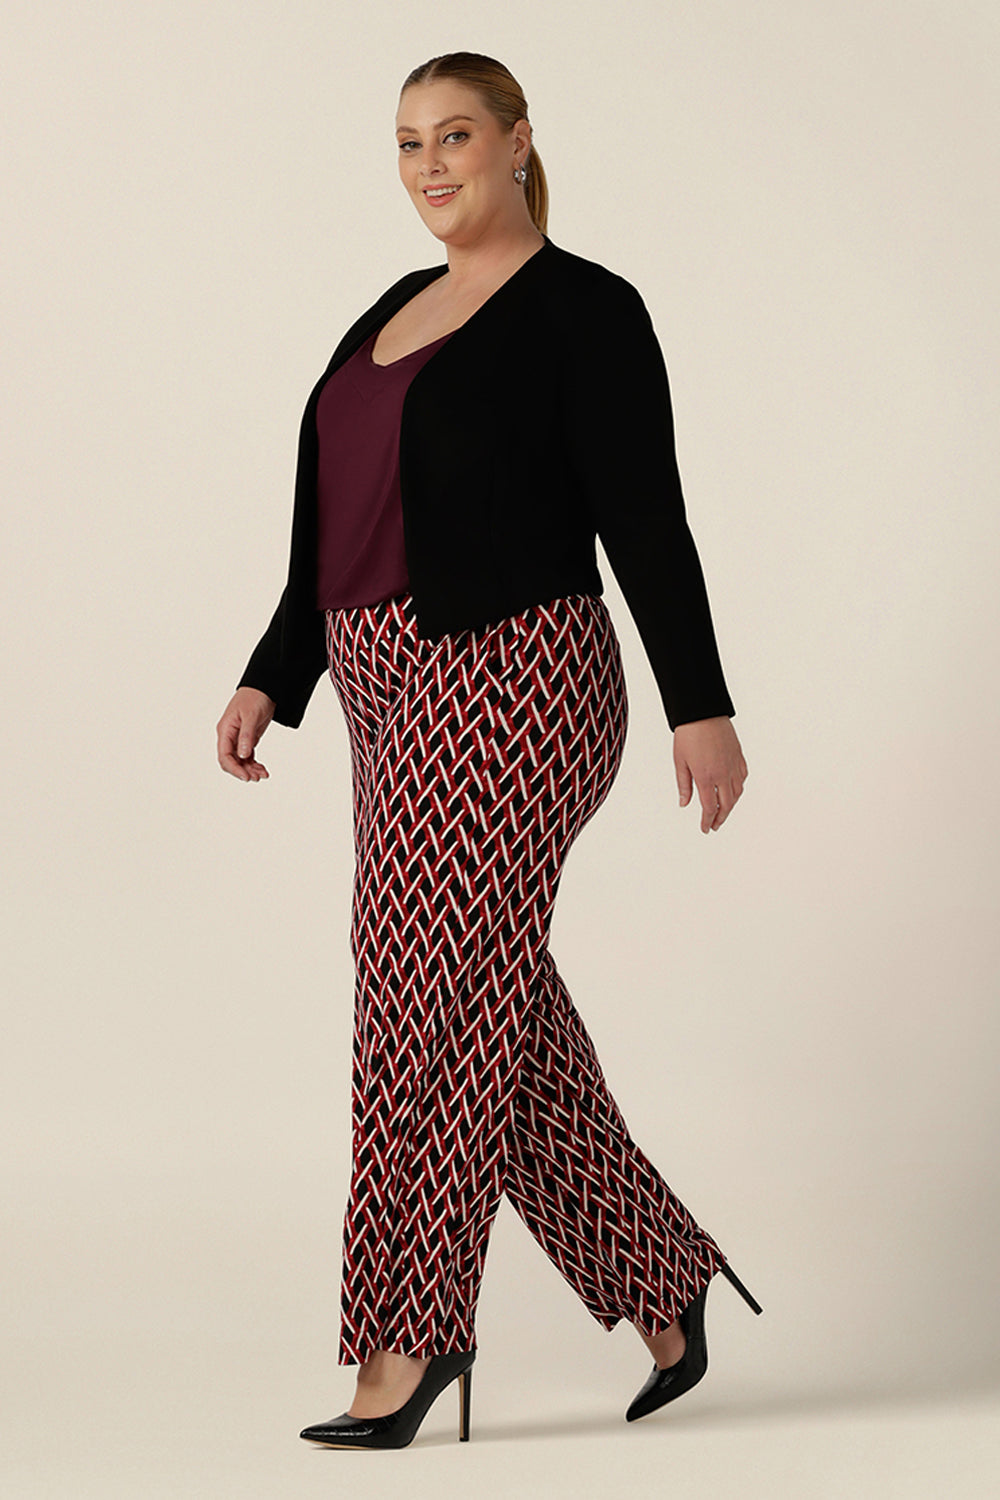 Side view of workwear pants for plus size women, these geometric print pants are straight cut , wide leg trousers with a wide, pull-on waistband. Styled for work wear, these office pants are worn with a plum cami top and workwear jacket in black. Made in Australia, shop online now in sizes 8 to 24.